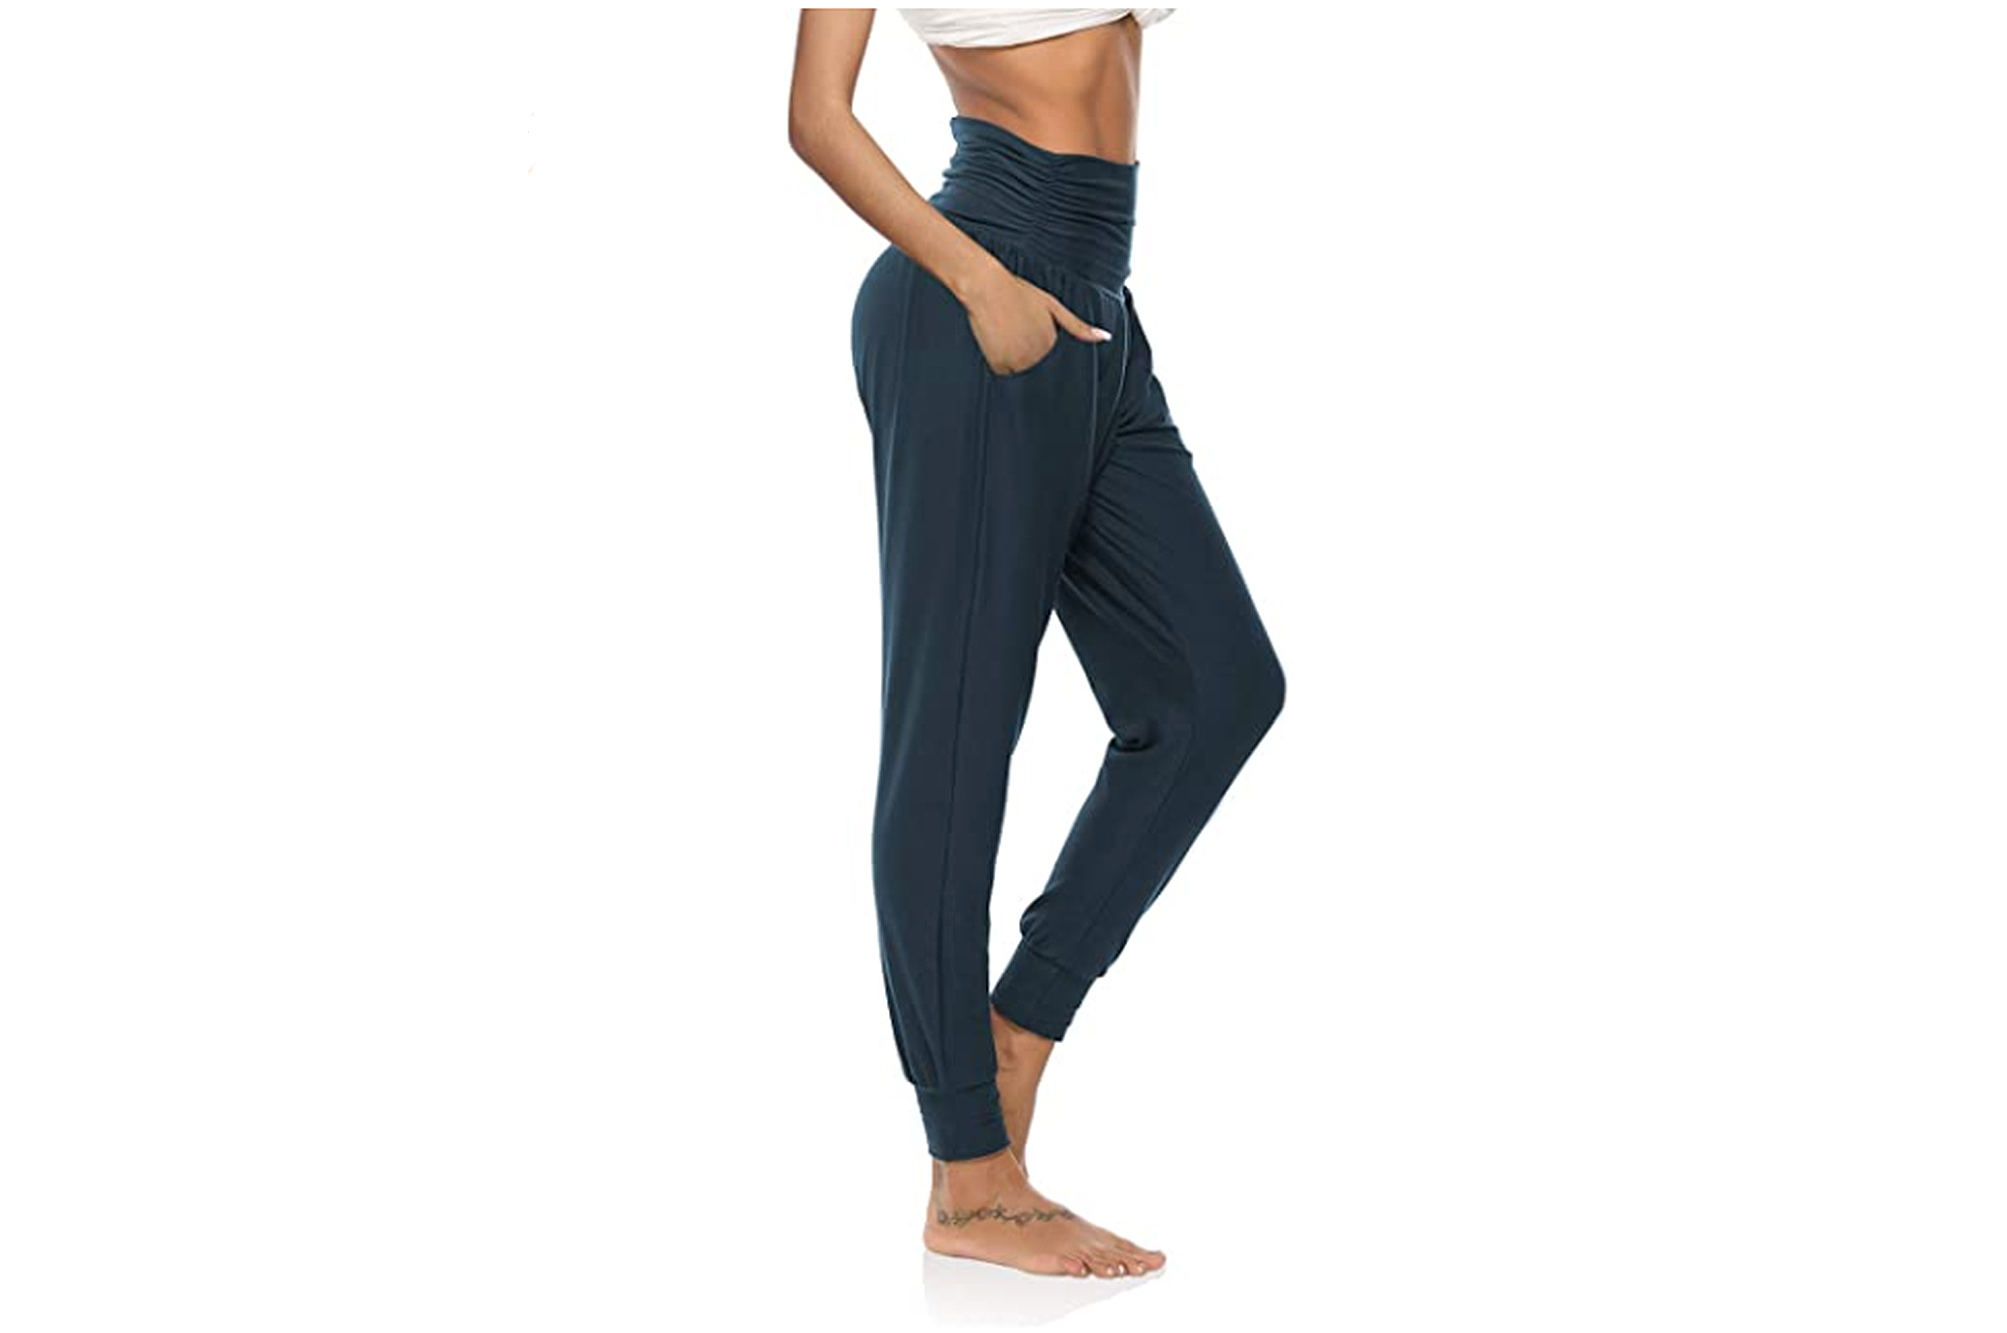 JIANGZHo Sweatpants for Women Casual Solid Elastic Joggers with Pockets Lounge Pants for Yoga Workout Running